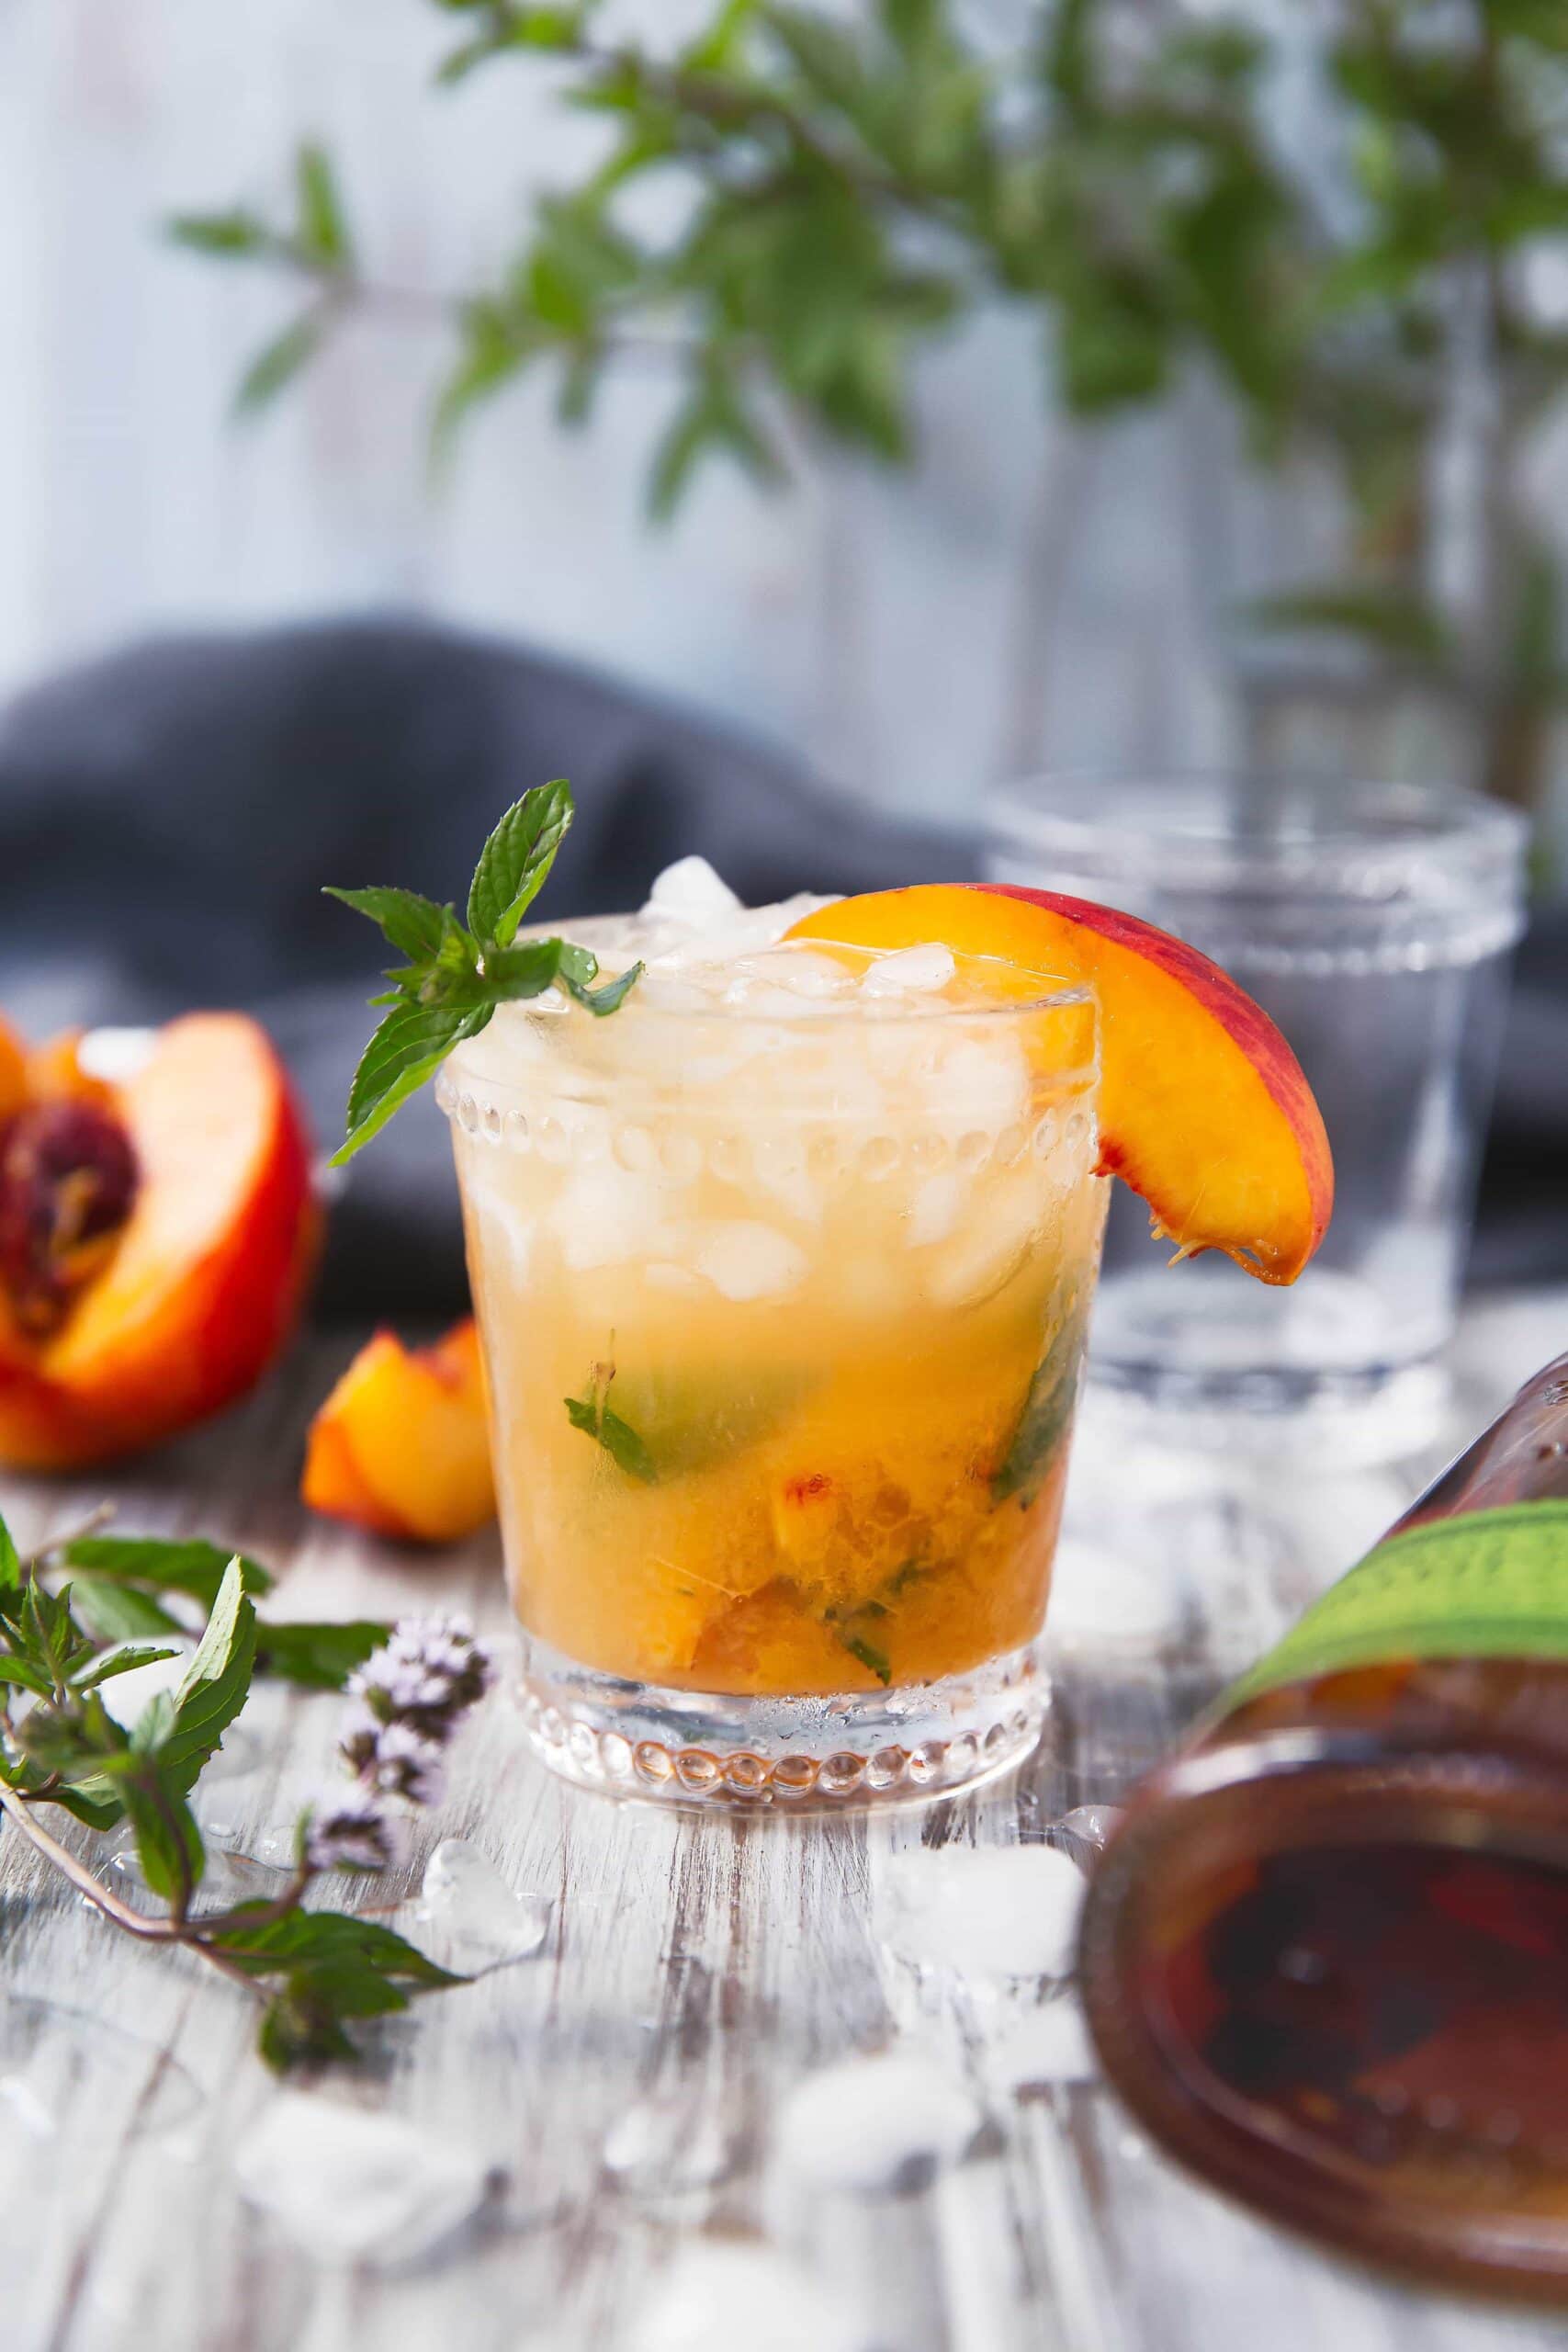 The classic mint julep gets a twist with this mouth-watering Peach Julep!